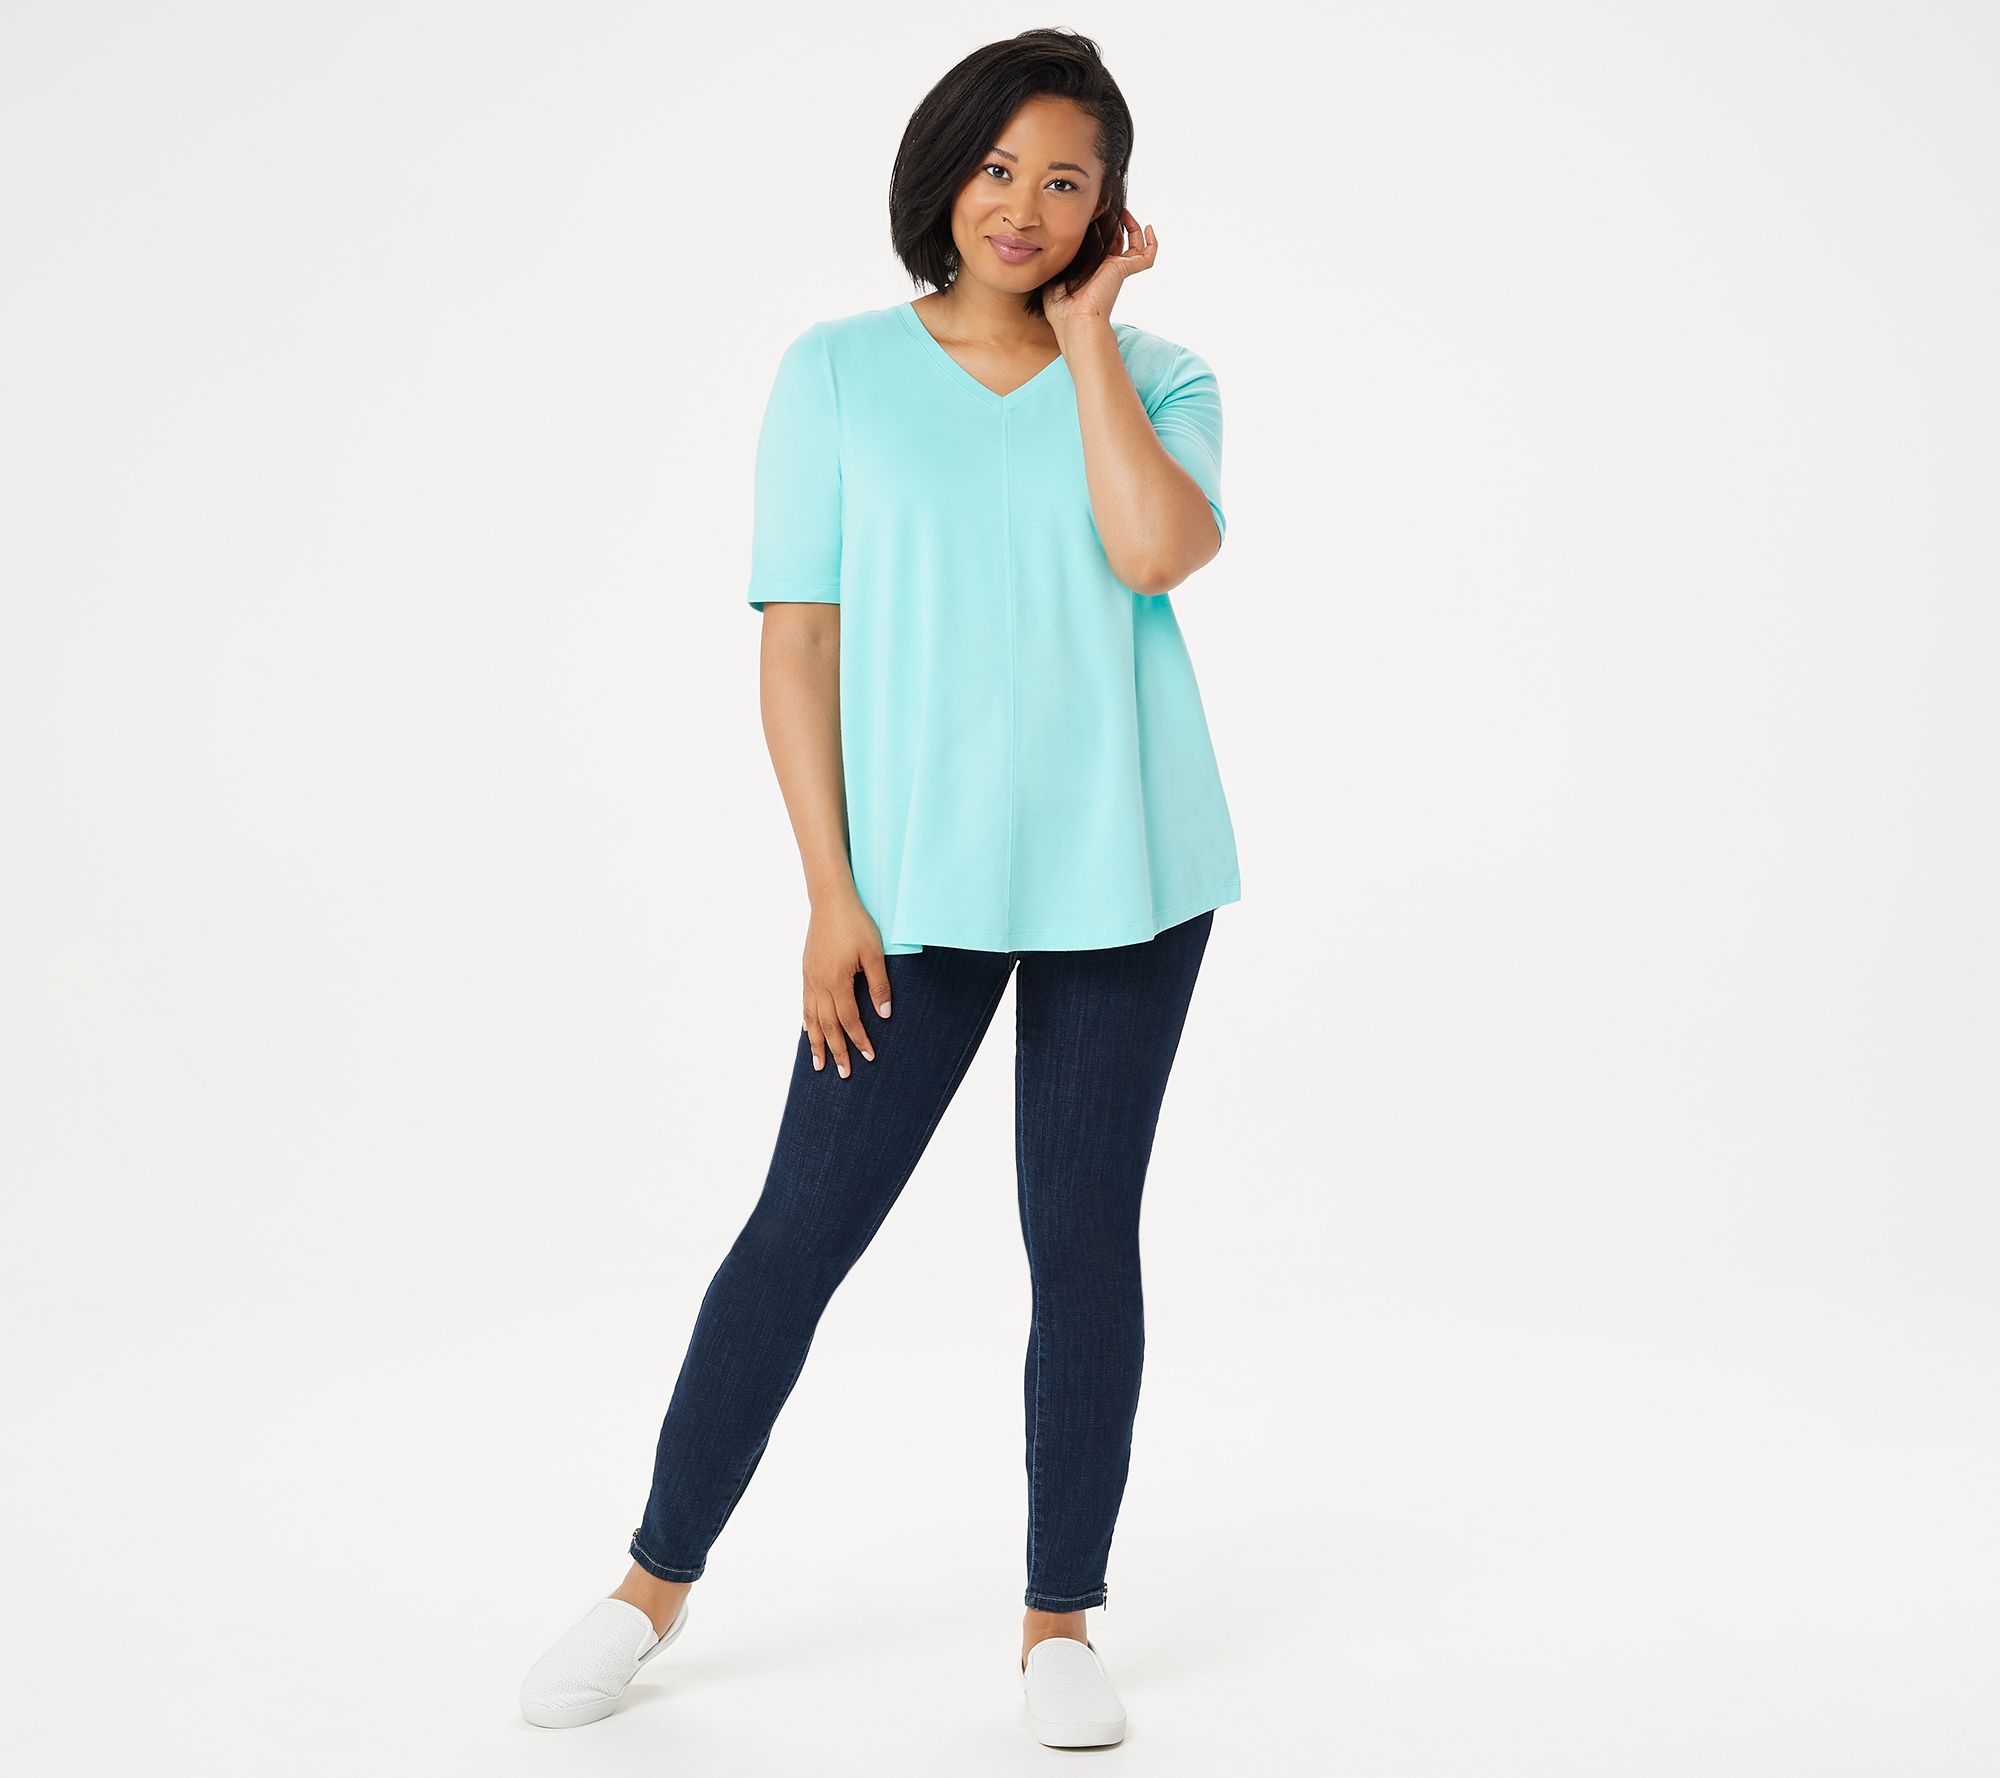 Denim & Co. Essentials Elbow Sleeve Top with Seaming Detail - QVC.com